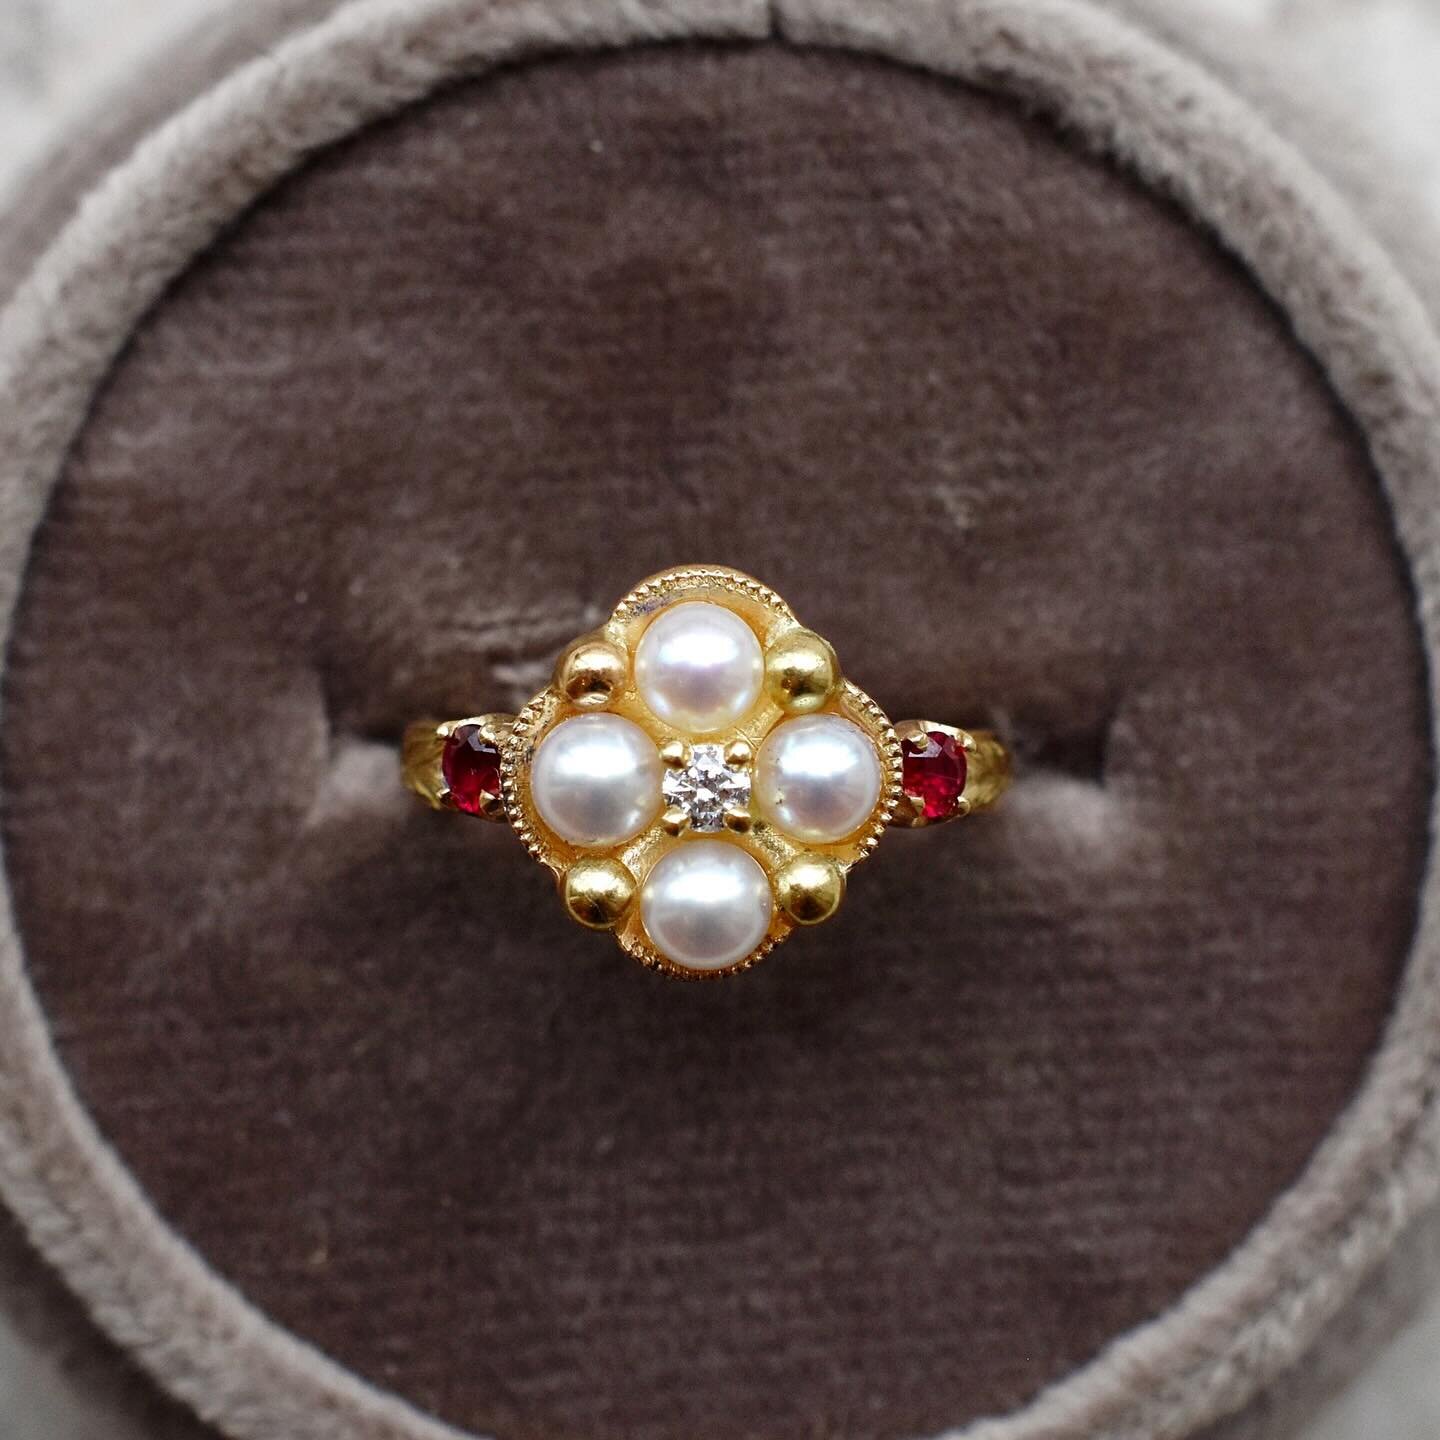 A renaissance inspired ring in 18k with pearls, rubies and a center diamond 👑